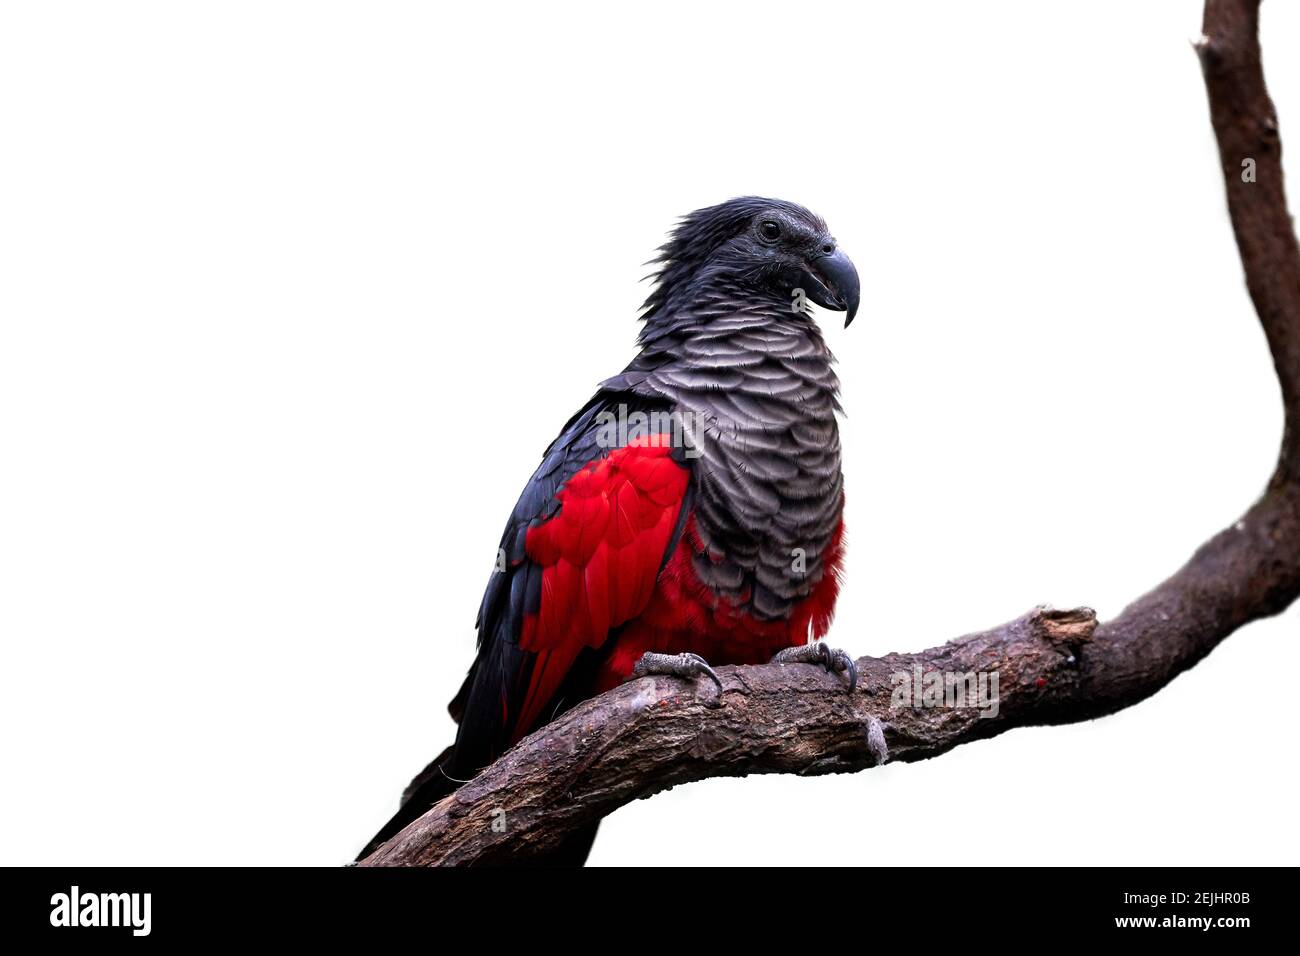 Isolated on white, Pesquet's parrot, Psittrichas fulgidus, red and black, vulturine parrot, endemic to montane rainforest in New Guinea. Vulnerable, t Stock Photo